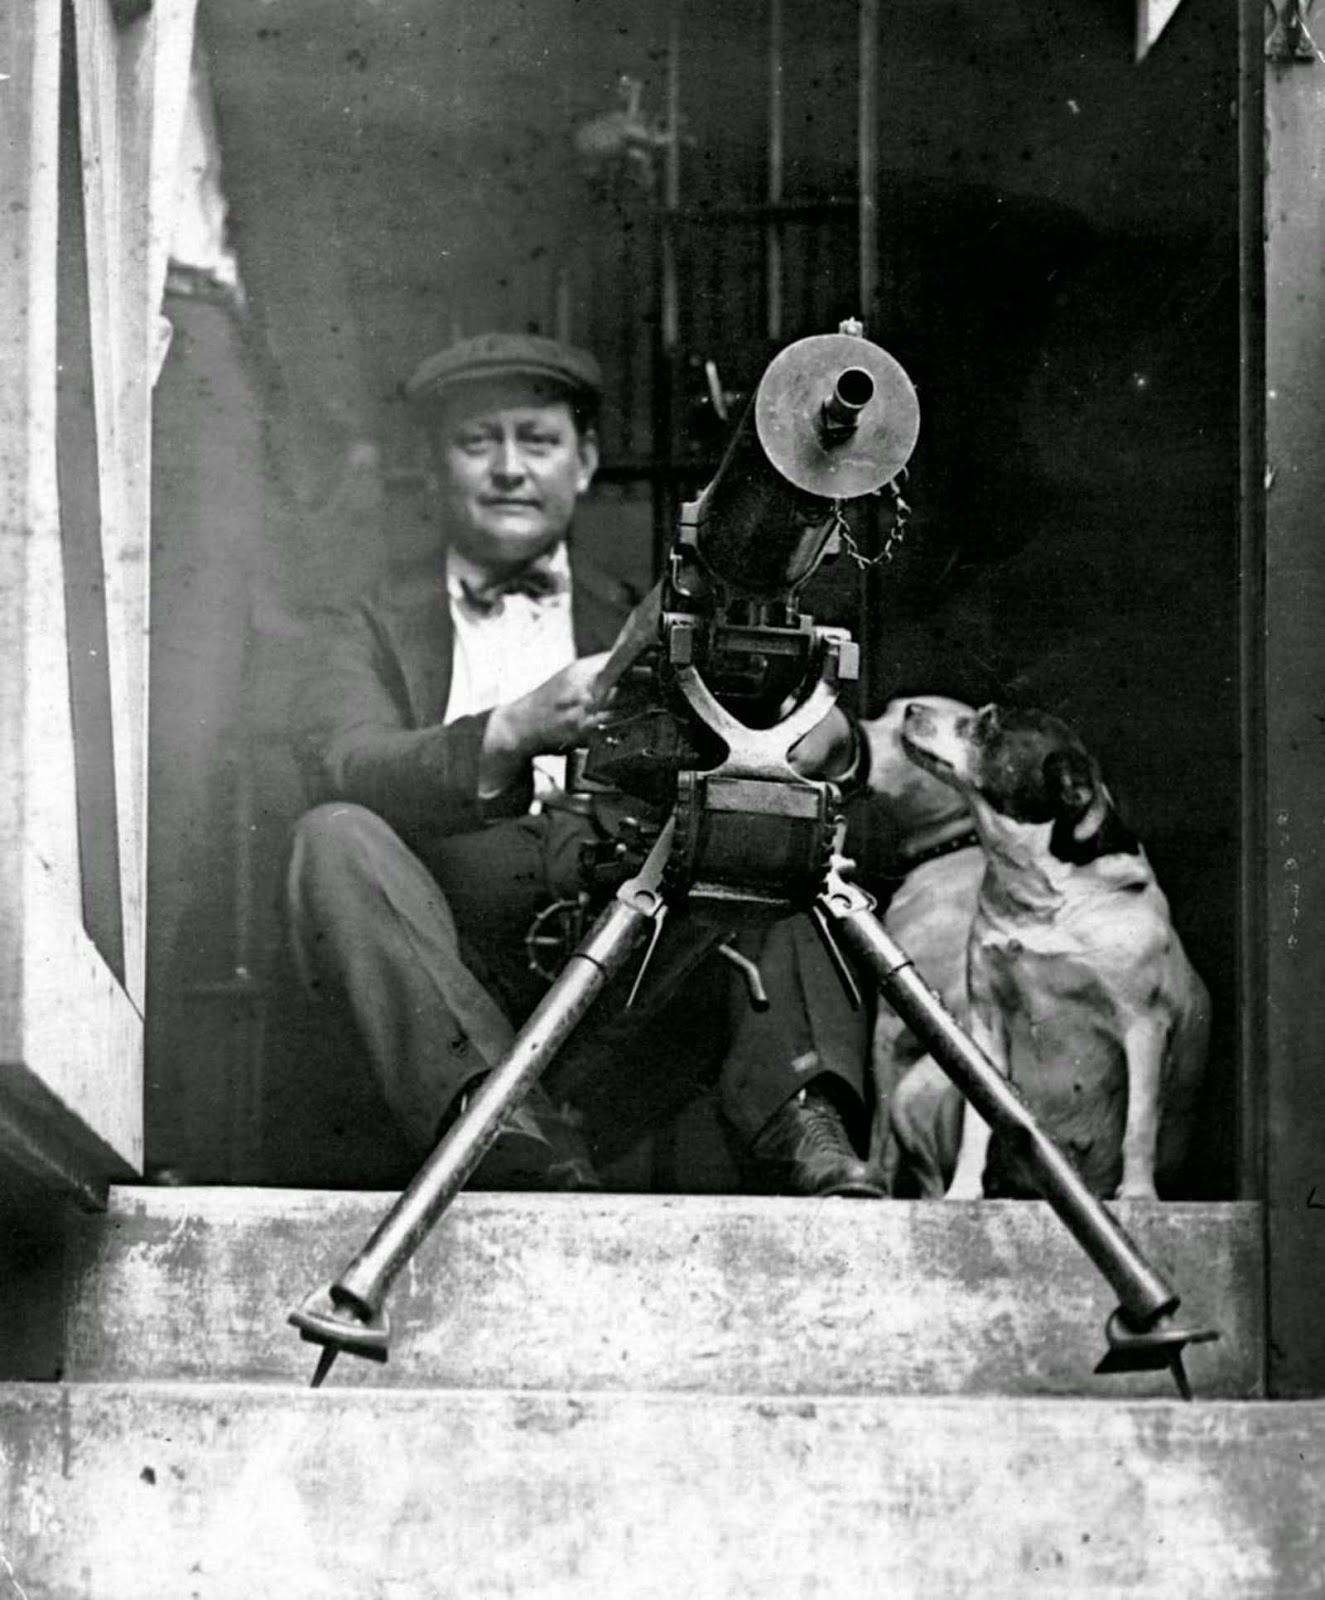 A man armed with a machine gun sits at the Cook County Jail during the 1919 Chicago race riots.